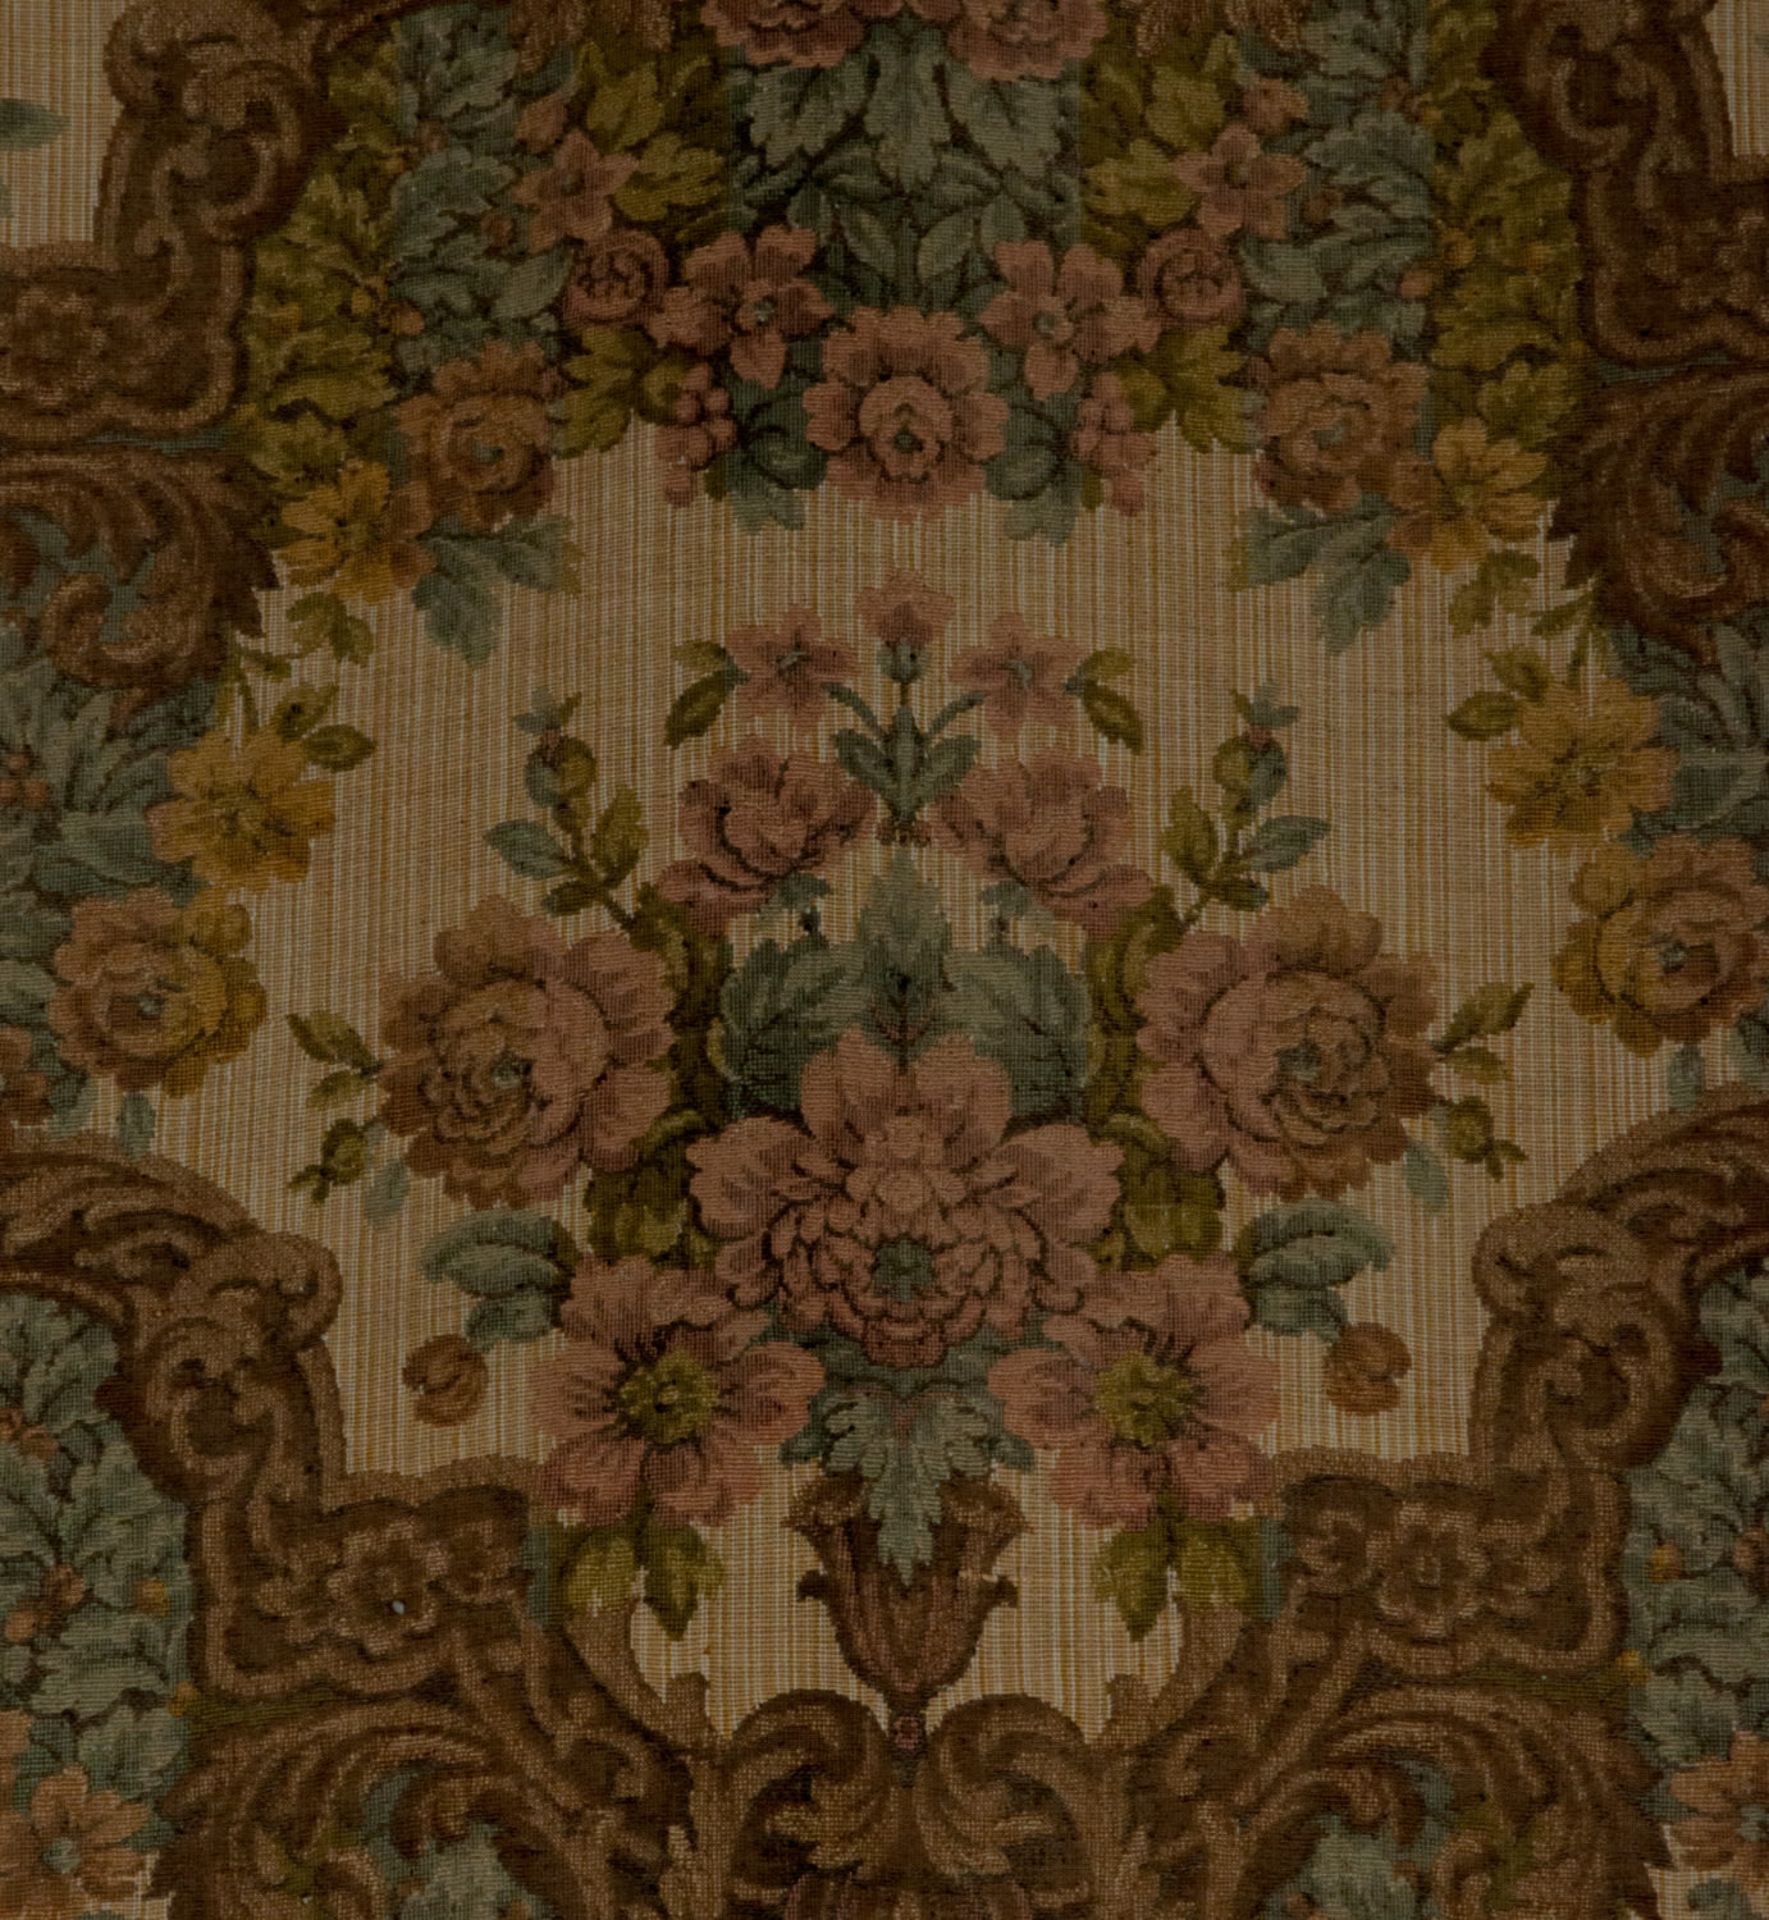 Large French "Verdure" tapestry with baroque style plant motifs, 19th century - Image 2 of 5